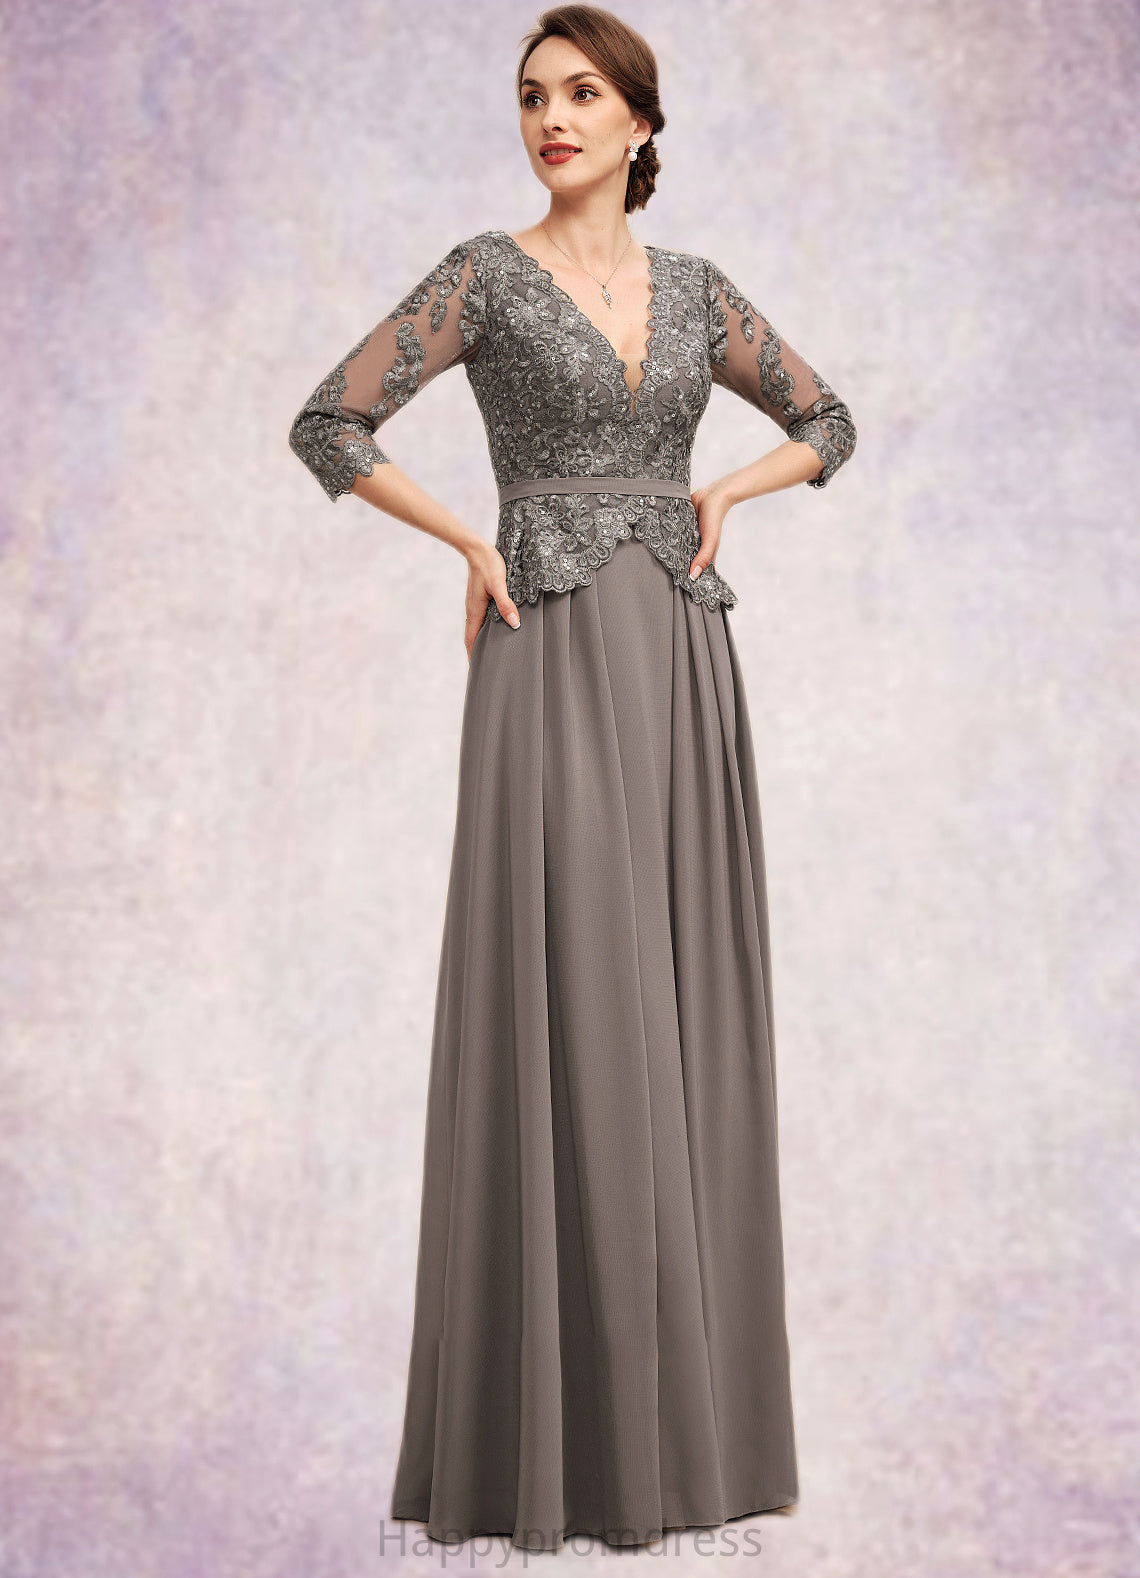 Alexandra A-Line V-neck Floor-Length Chiffon Lace Mother of the Bride Dress With Sequins XXS126P0014574